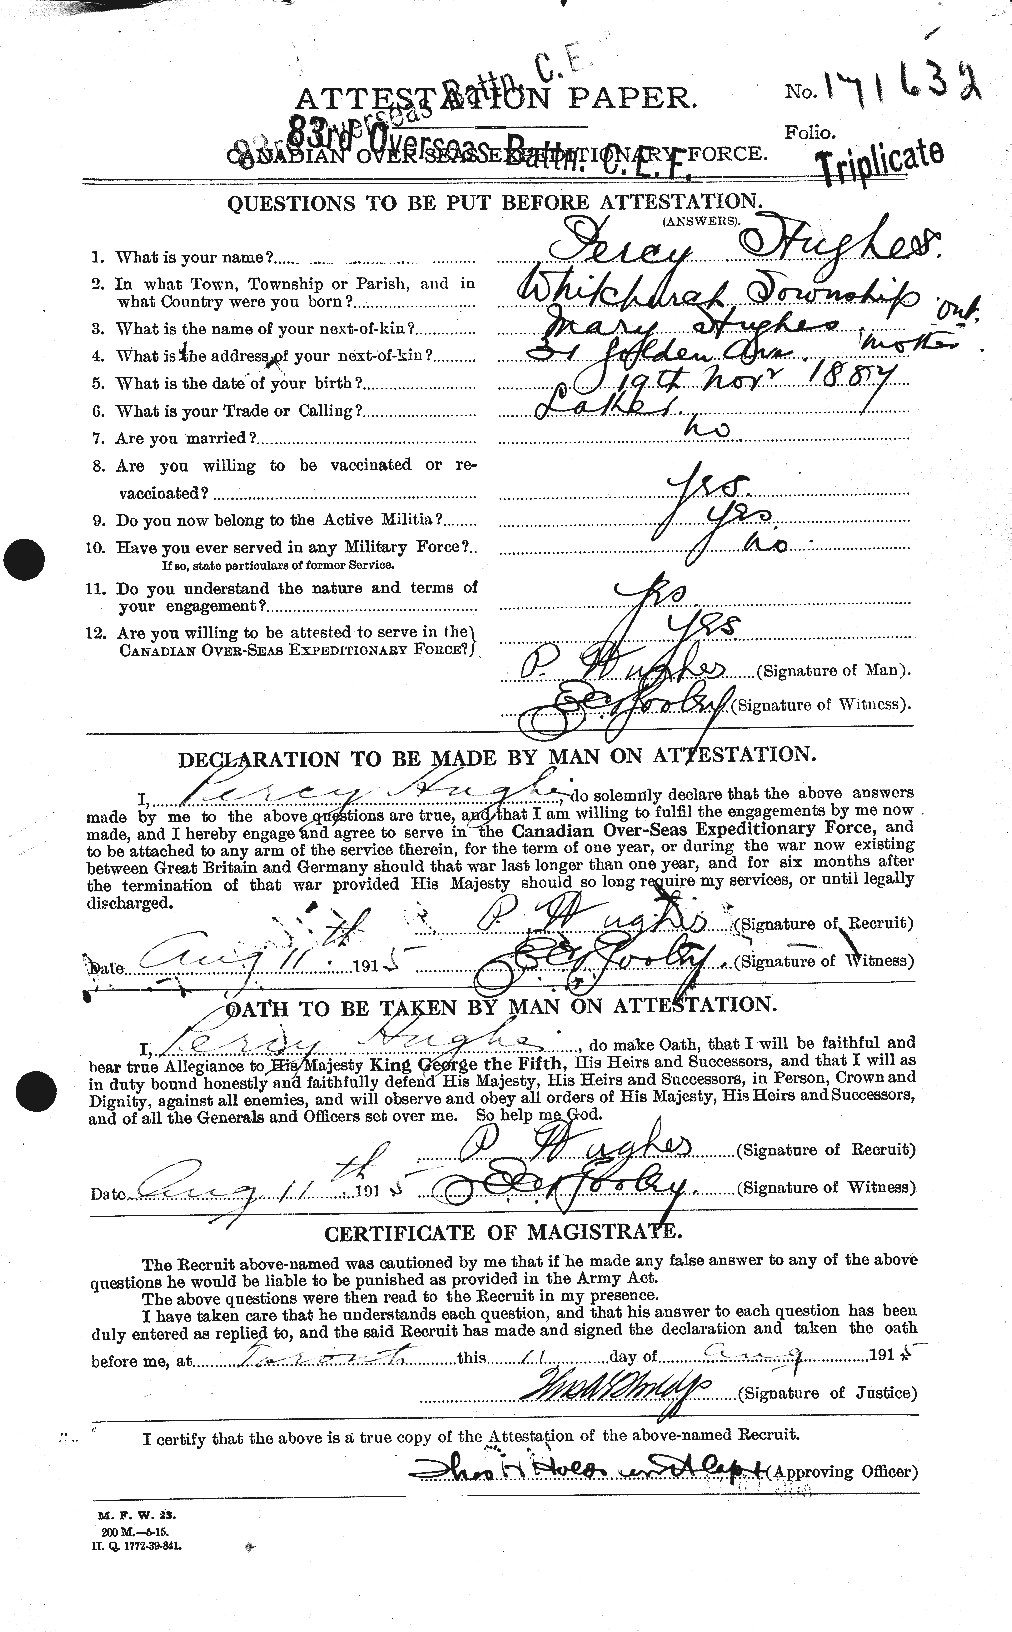 Personnel Records of the First World War - CEF 404154a